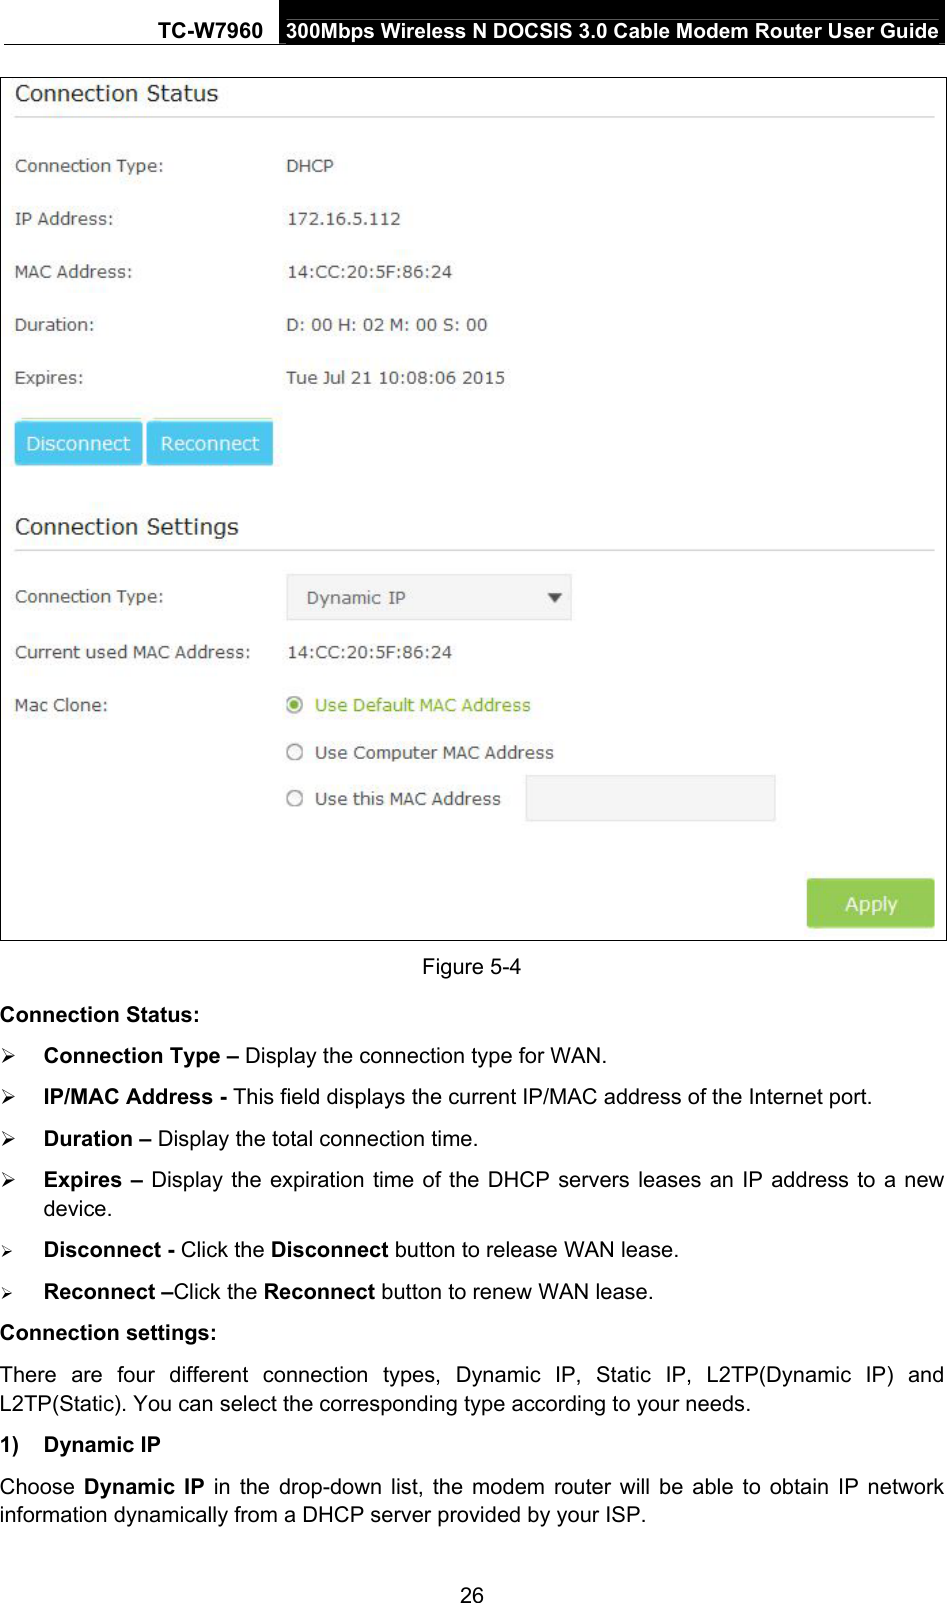 TC-W7960  300Mbps Wireless N DOCSIS 3.0 Cable Modem Router User Guide  Figure 5-4 Connection Status:  Connection Type – Display the connection type for WAN.  IP/MAC Address - This field displays the current IP/MAC address of the Internet port.  Duration – Display the total connection time.  Expires – Display the expiration time of the DHCP servers leases an IP address to a new device.  Disconnect - Click the Disconnect button to release WAN lease.  Reconnect –Click the Reconnect button to renew WAN lease. Connection settings: There are four different connection types, Dynamic IP, Static IP, L2TP(Dynamic IP) and L2TP(Static). You can select the corresponding type according to your needs. 1) Dynamic IP Choose  Dynamic IP in the drop-down list, the modem router will be able to obtain IP network information dynamically from a DHCP server provided by your ISP. 26 